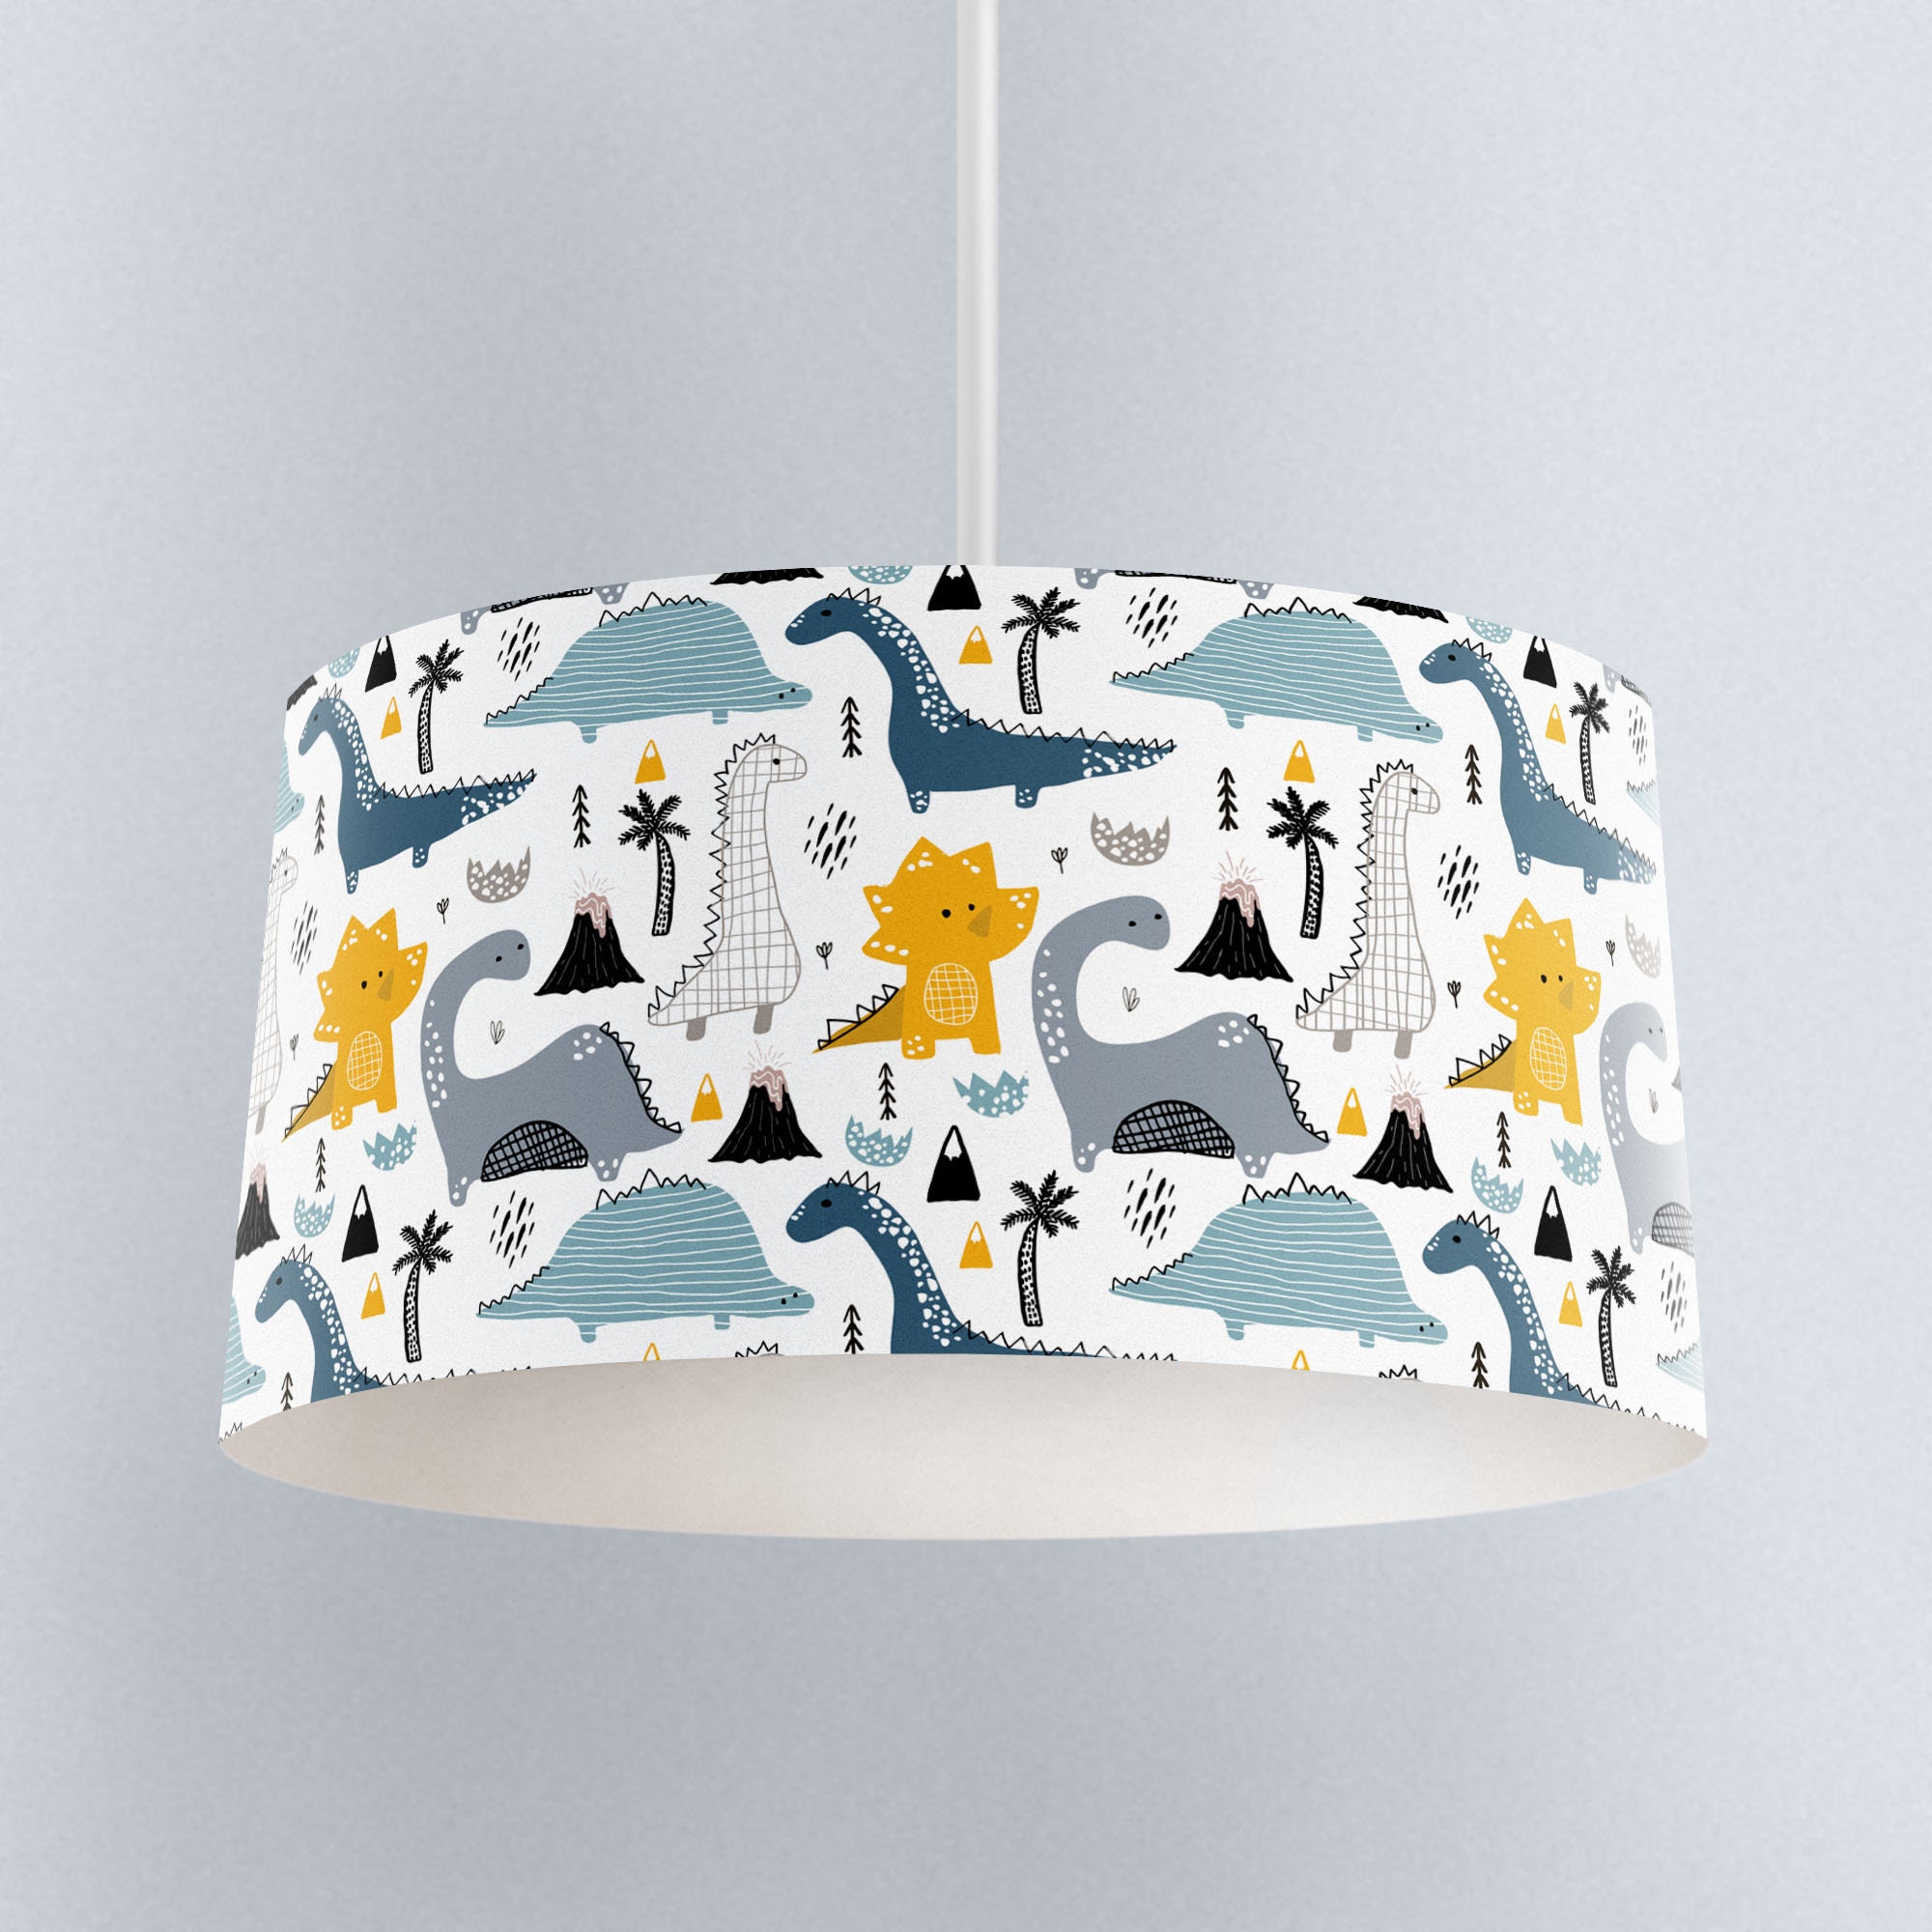 MY FIRST JCB LAMPSHADE CEILING LIGHT SHADE KIDS FREE P+P 